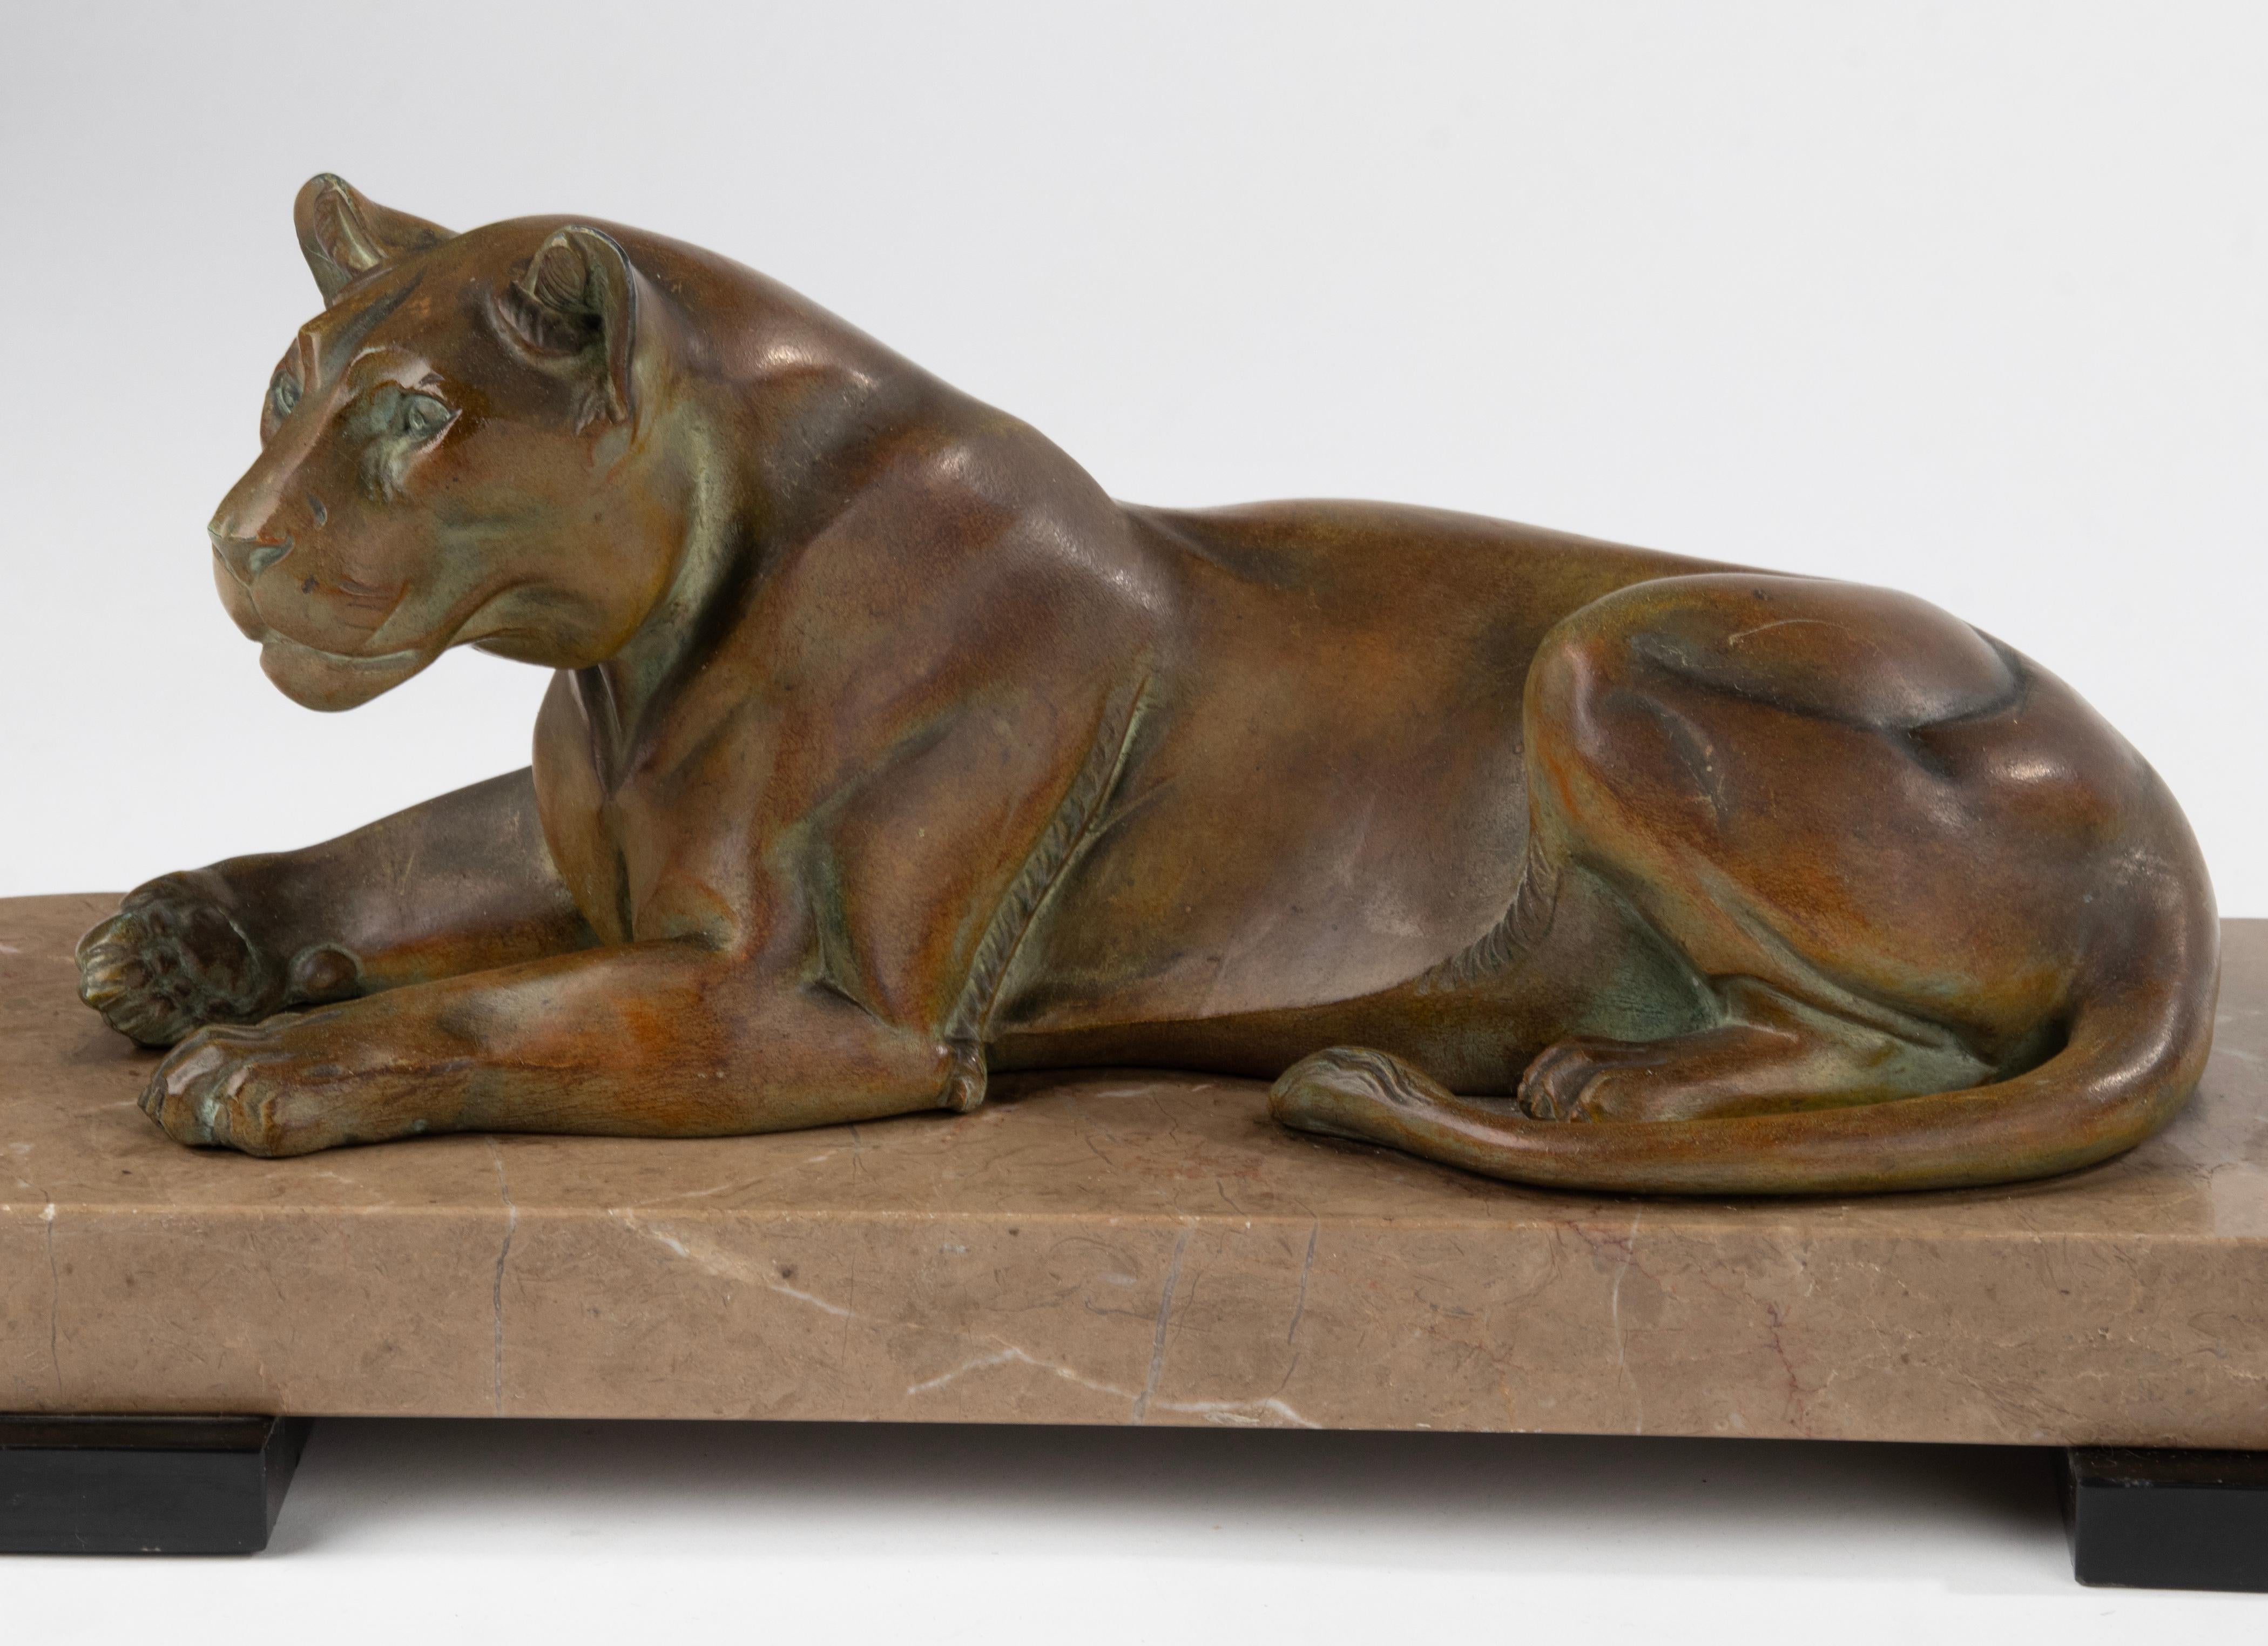 Hand-Crafted Art Deco Animal Sculpture of a Lioness Made of Spelter and Marble